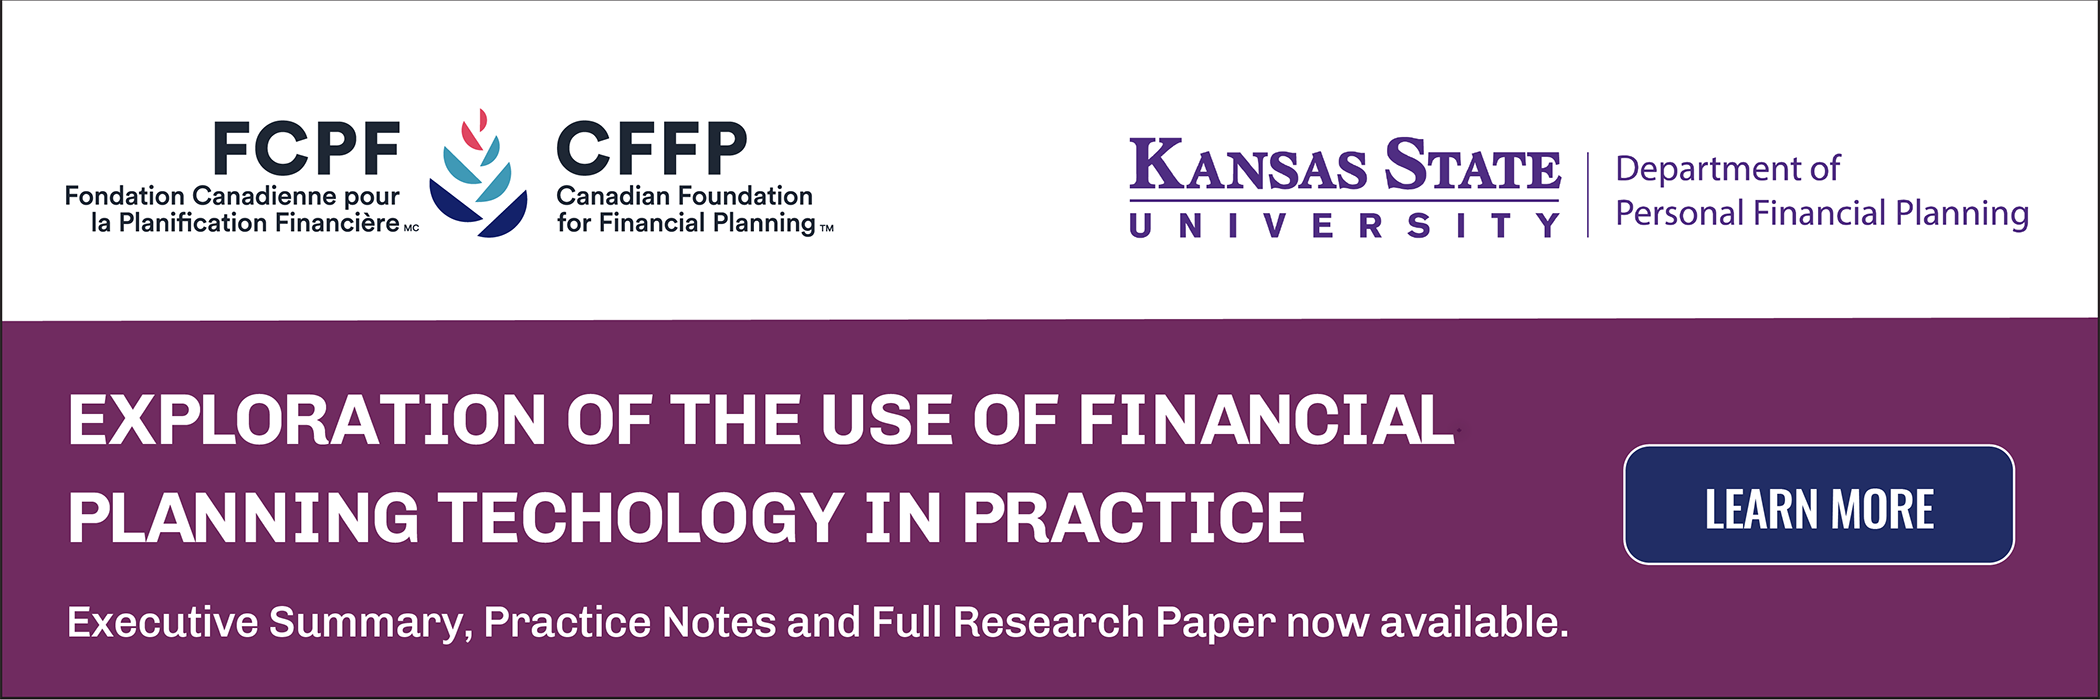 Exploration of the use of financial planning technology in practice. Executive summary, Practice notes and full research paper now available. Kansas State University Department of Personal Financial Planning. CFFP logo. Learn more